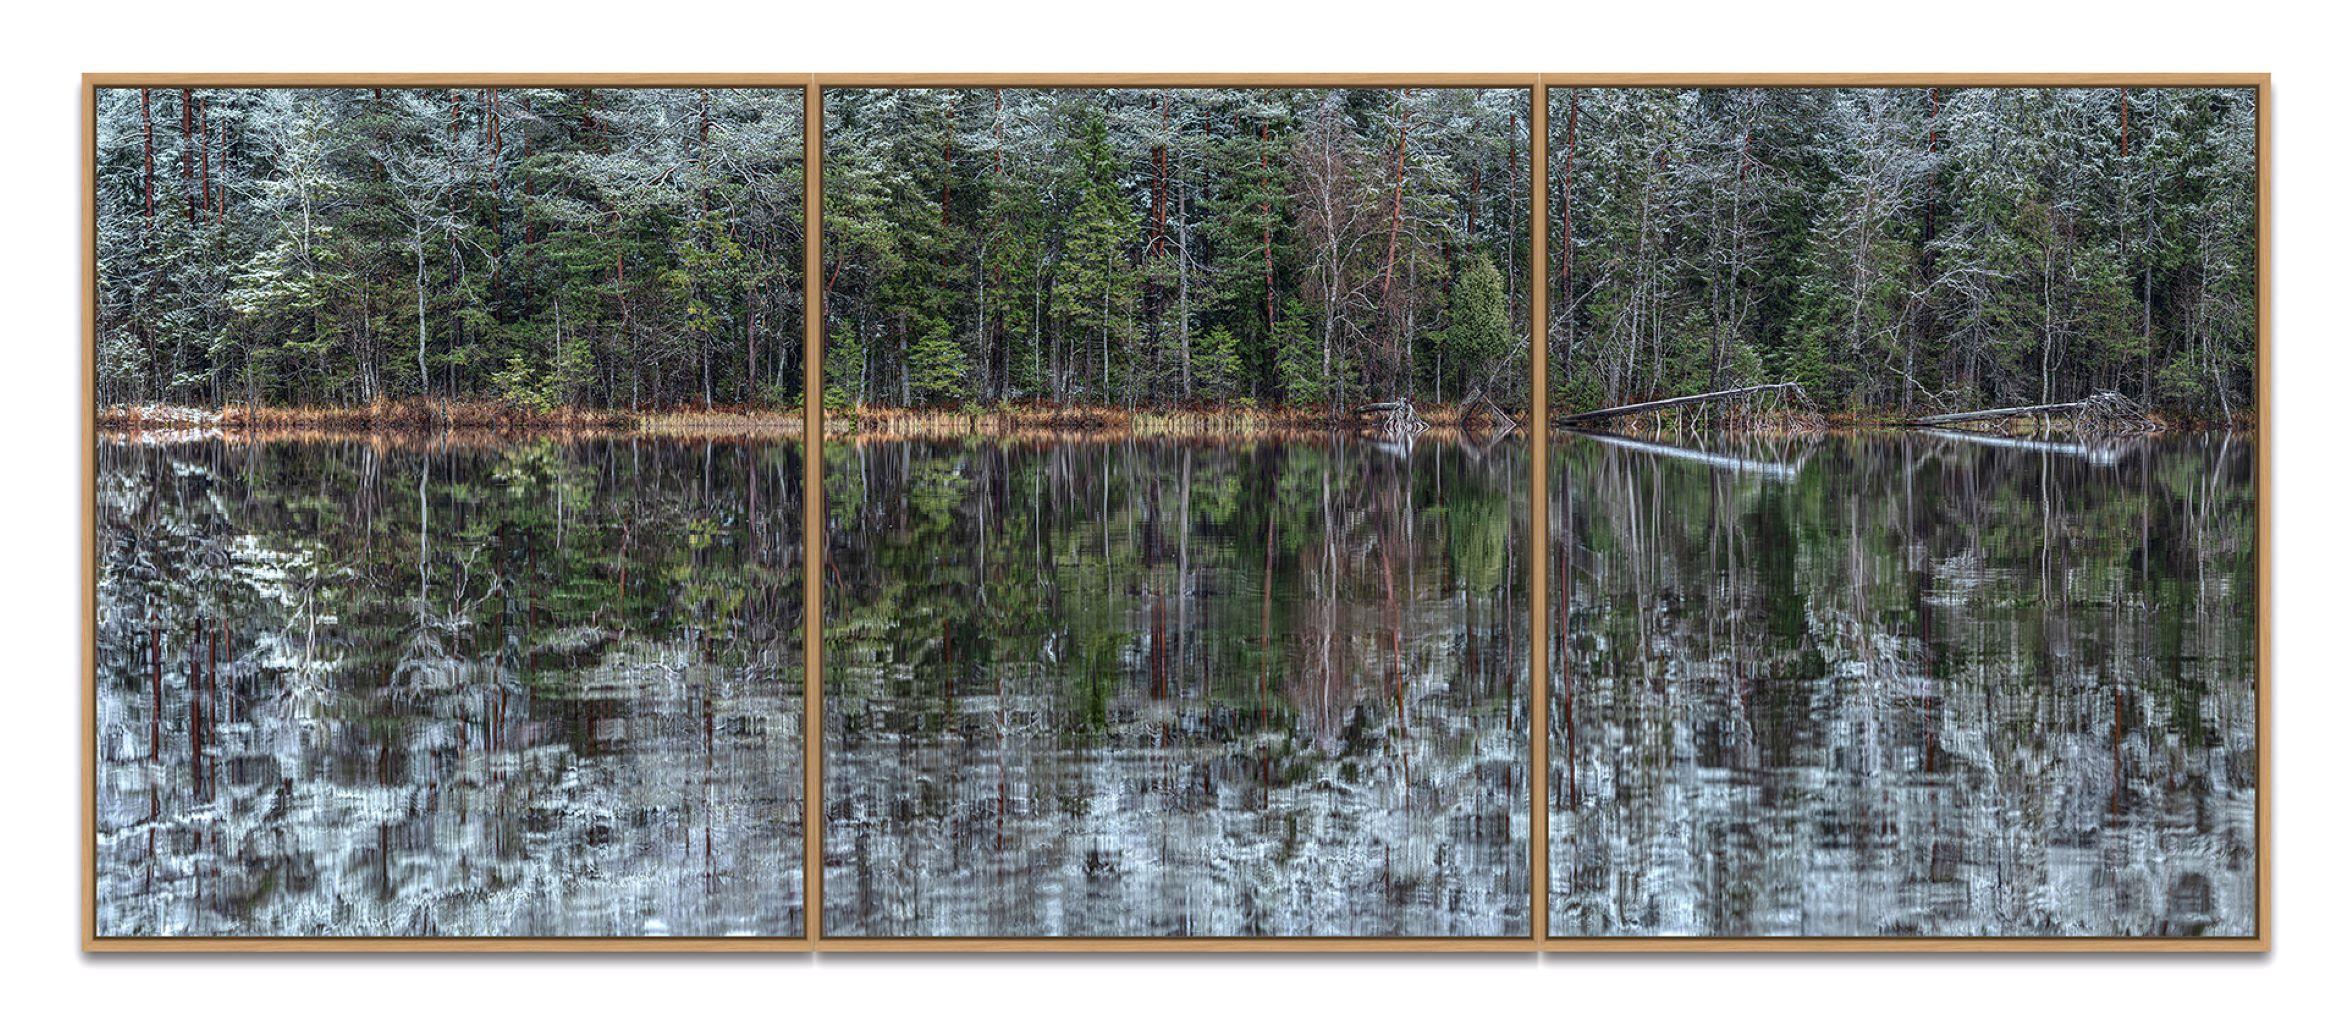 Deep Mirroring Forest 001 by Bernhard Lang - Landscape photography, trees, green For Sale 3